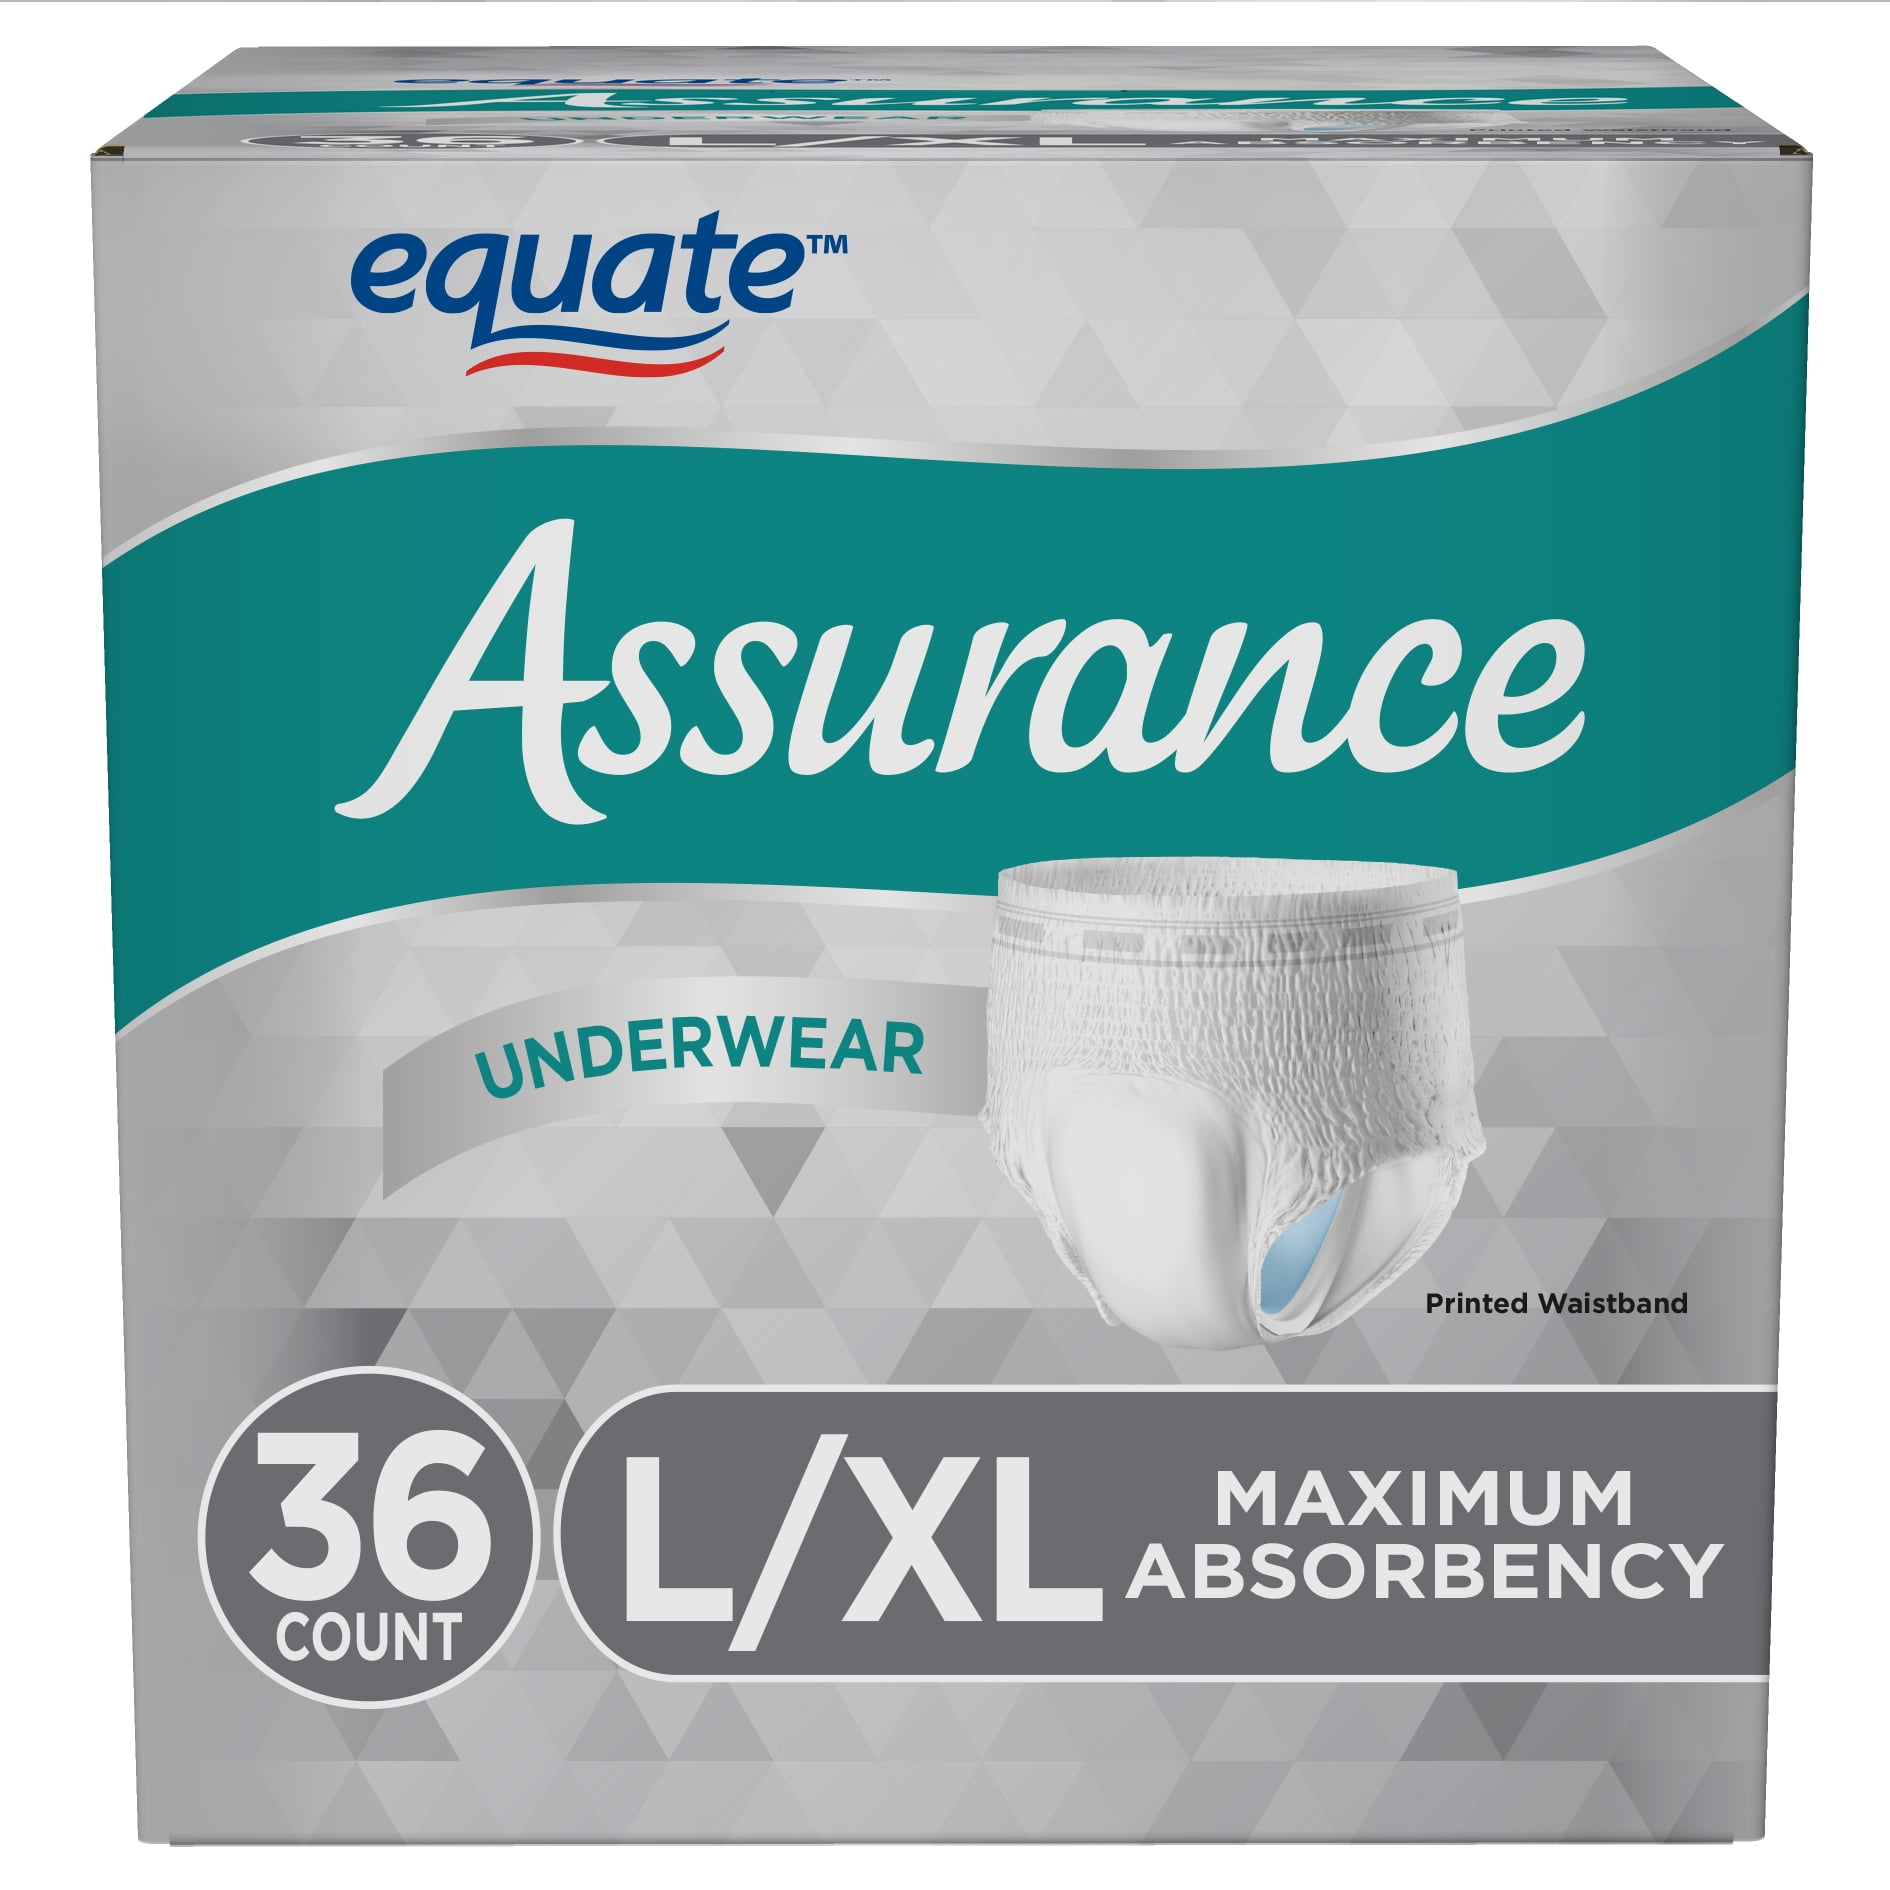 Equate Assurance Underwear for Men, Size L/XL, 36 Count(Pack of 2 ...